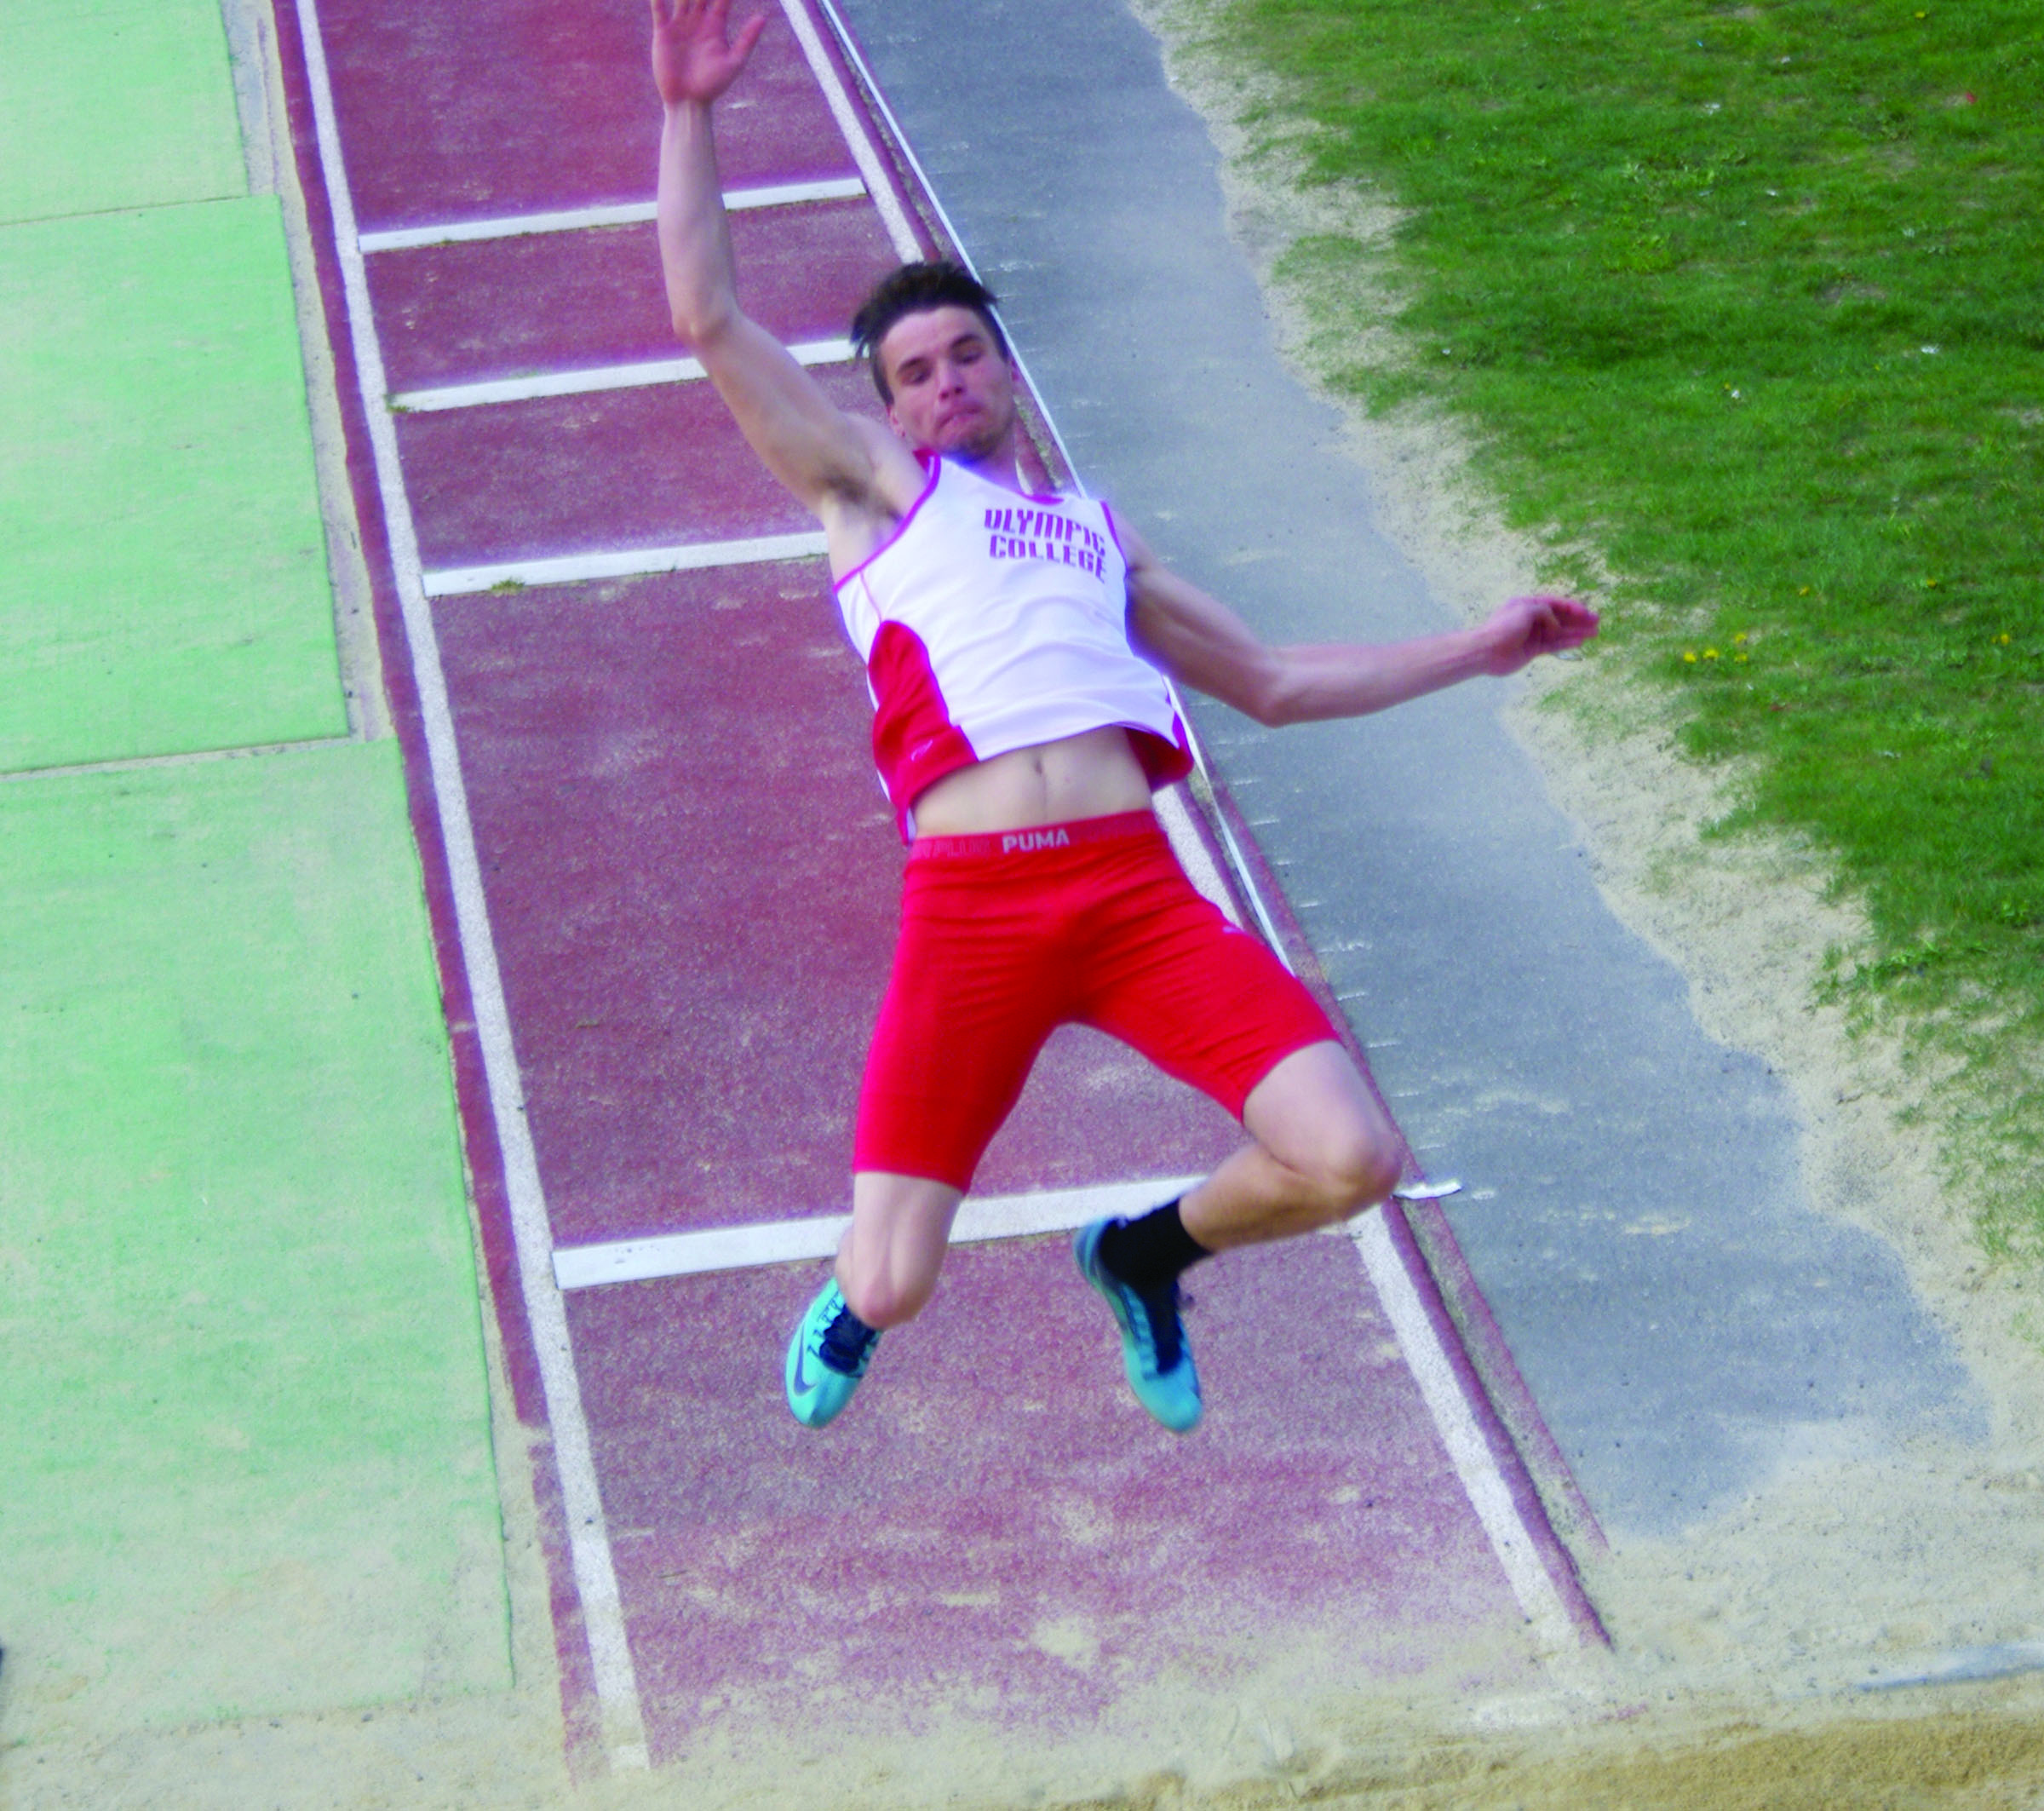 Sequim High School graduate Jayson Brocklesby competes in the long jump as part of the decathlon at the Western Washington University Multi Event meet in Bellingham. Brocklesby is in the lead after the first day. (Dan Dittmer/Olympic College)